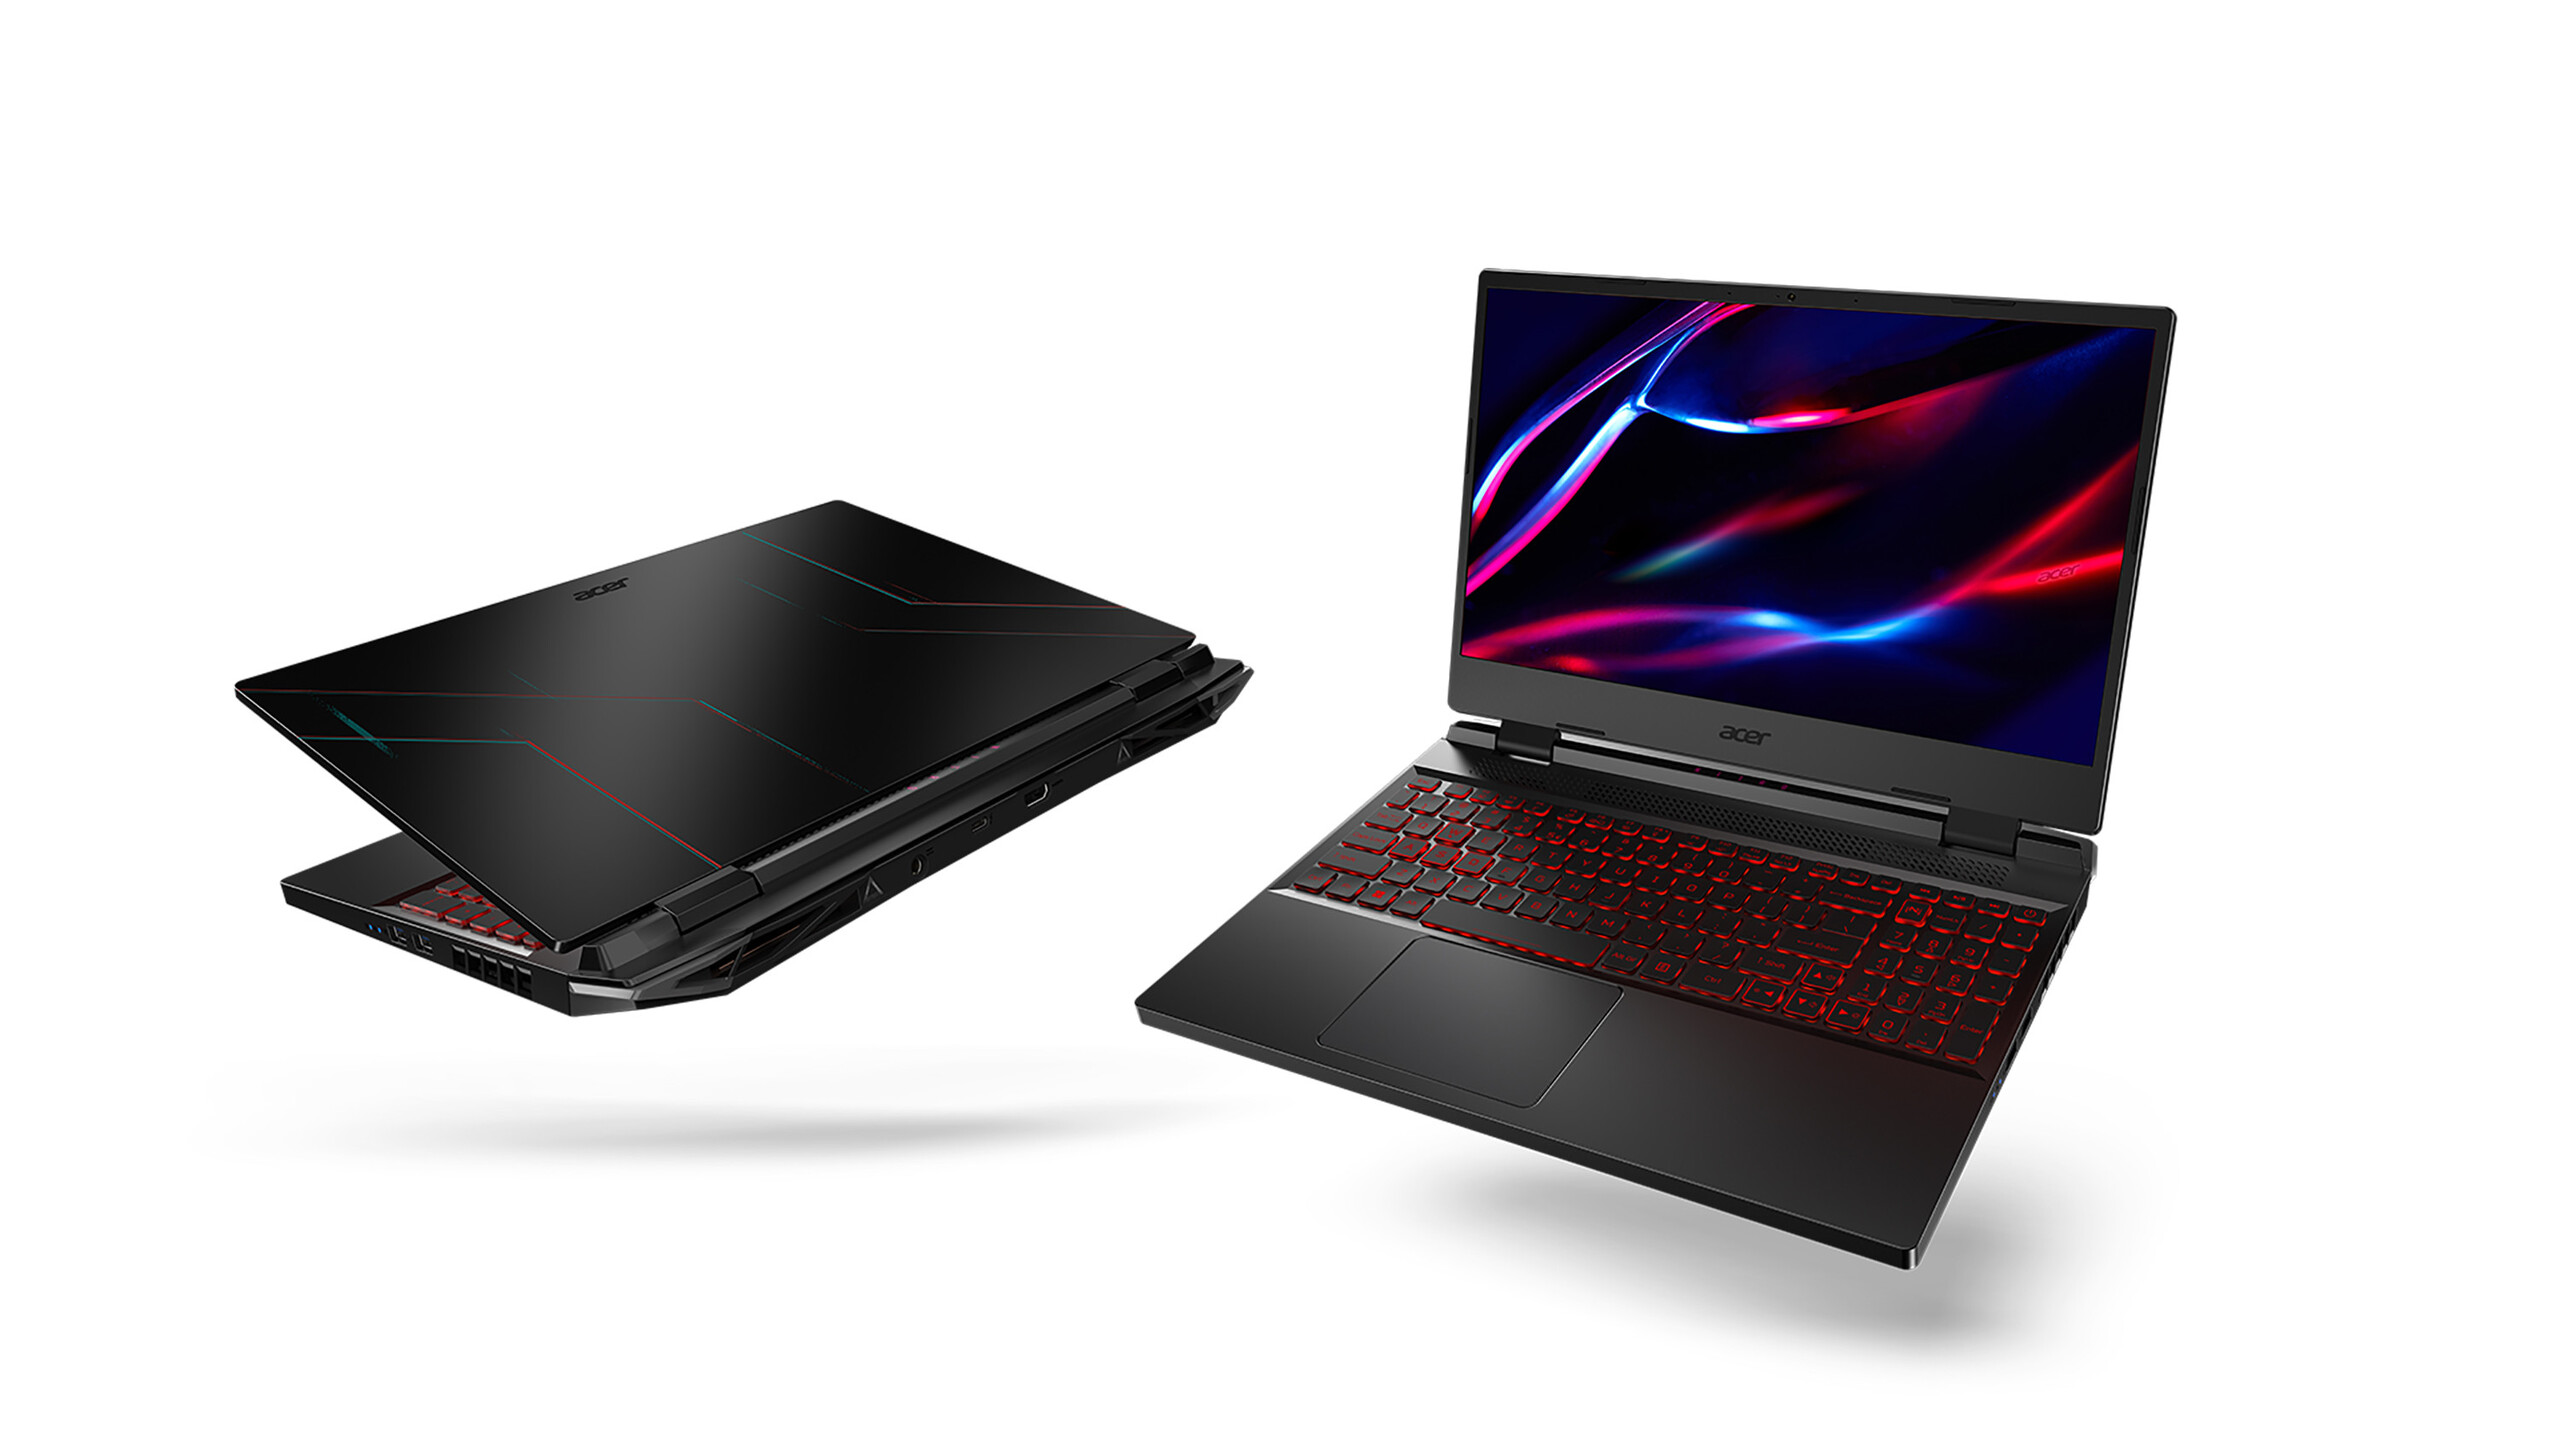 Acer Nitro 5 upgraded with a 165Hz QHD screen, Intel/AMD processors and a  new graphics card - NotebookCheck.net News